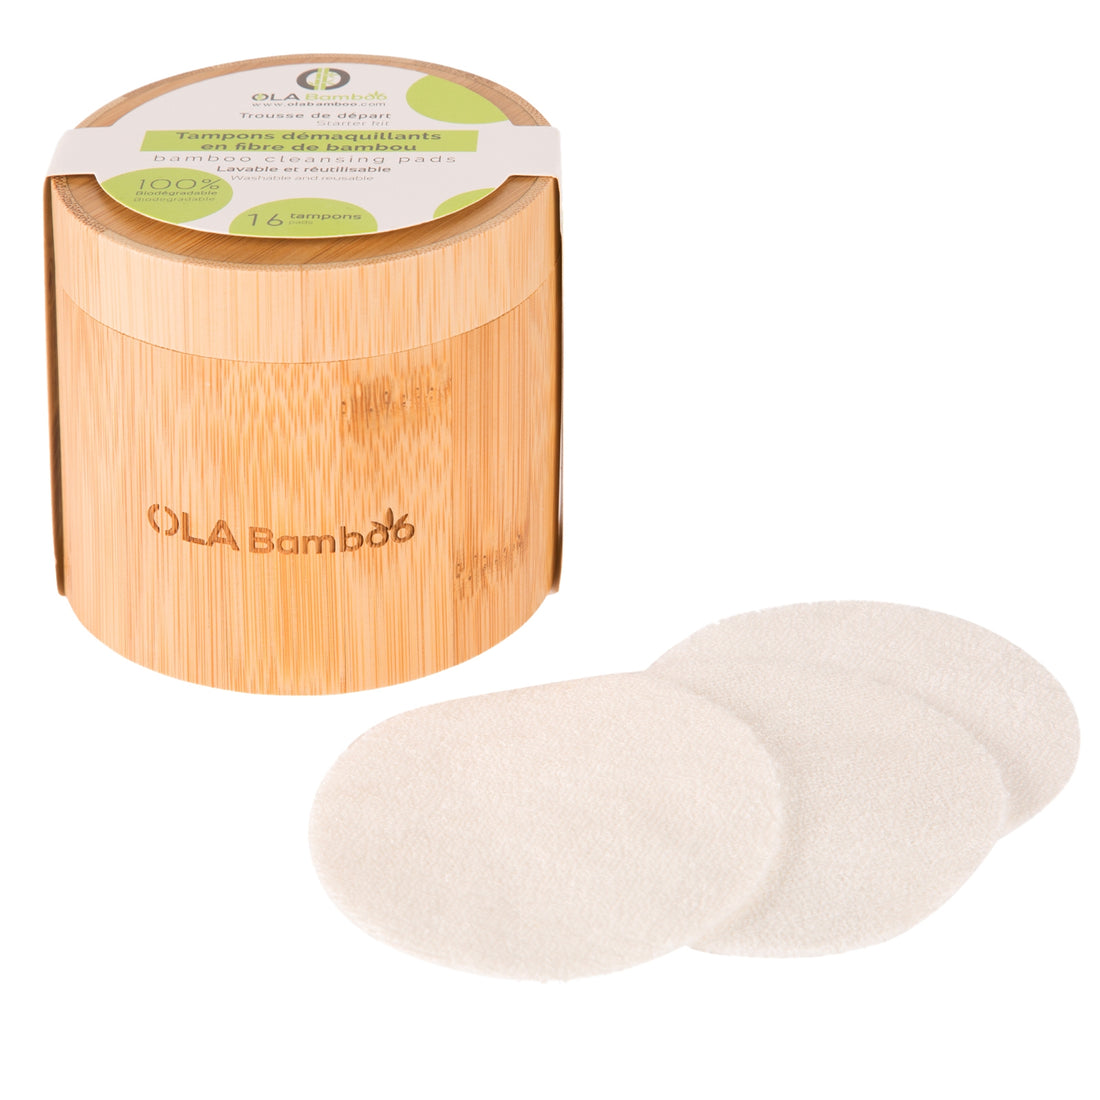 OLA Bamboo Eco Friendly Reusable Makeup Remover Pad Set With Container And Pads.